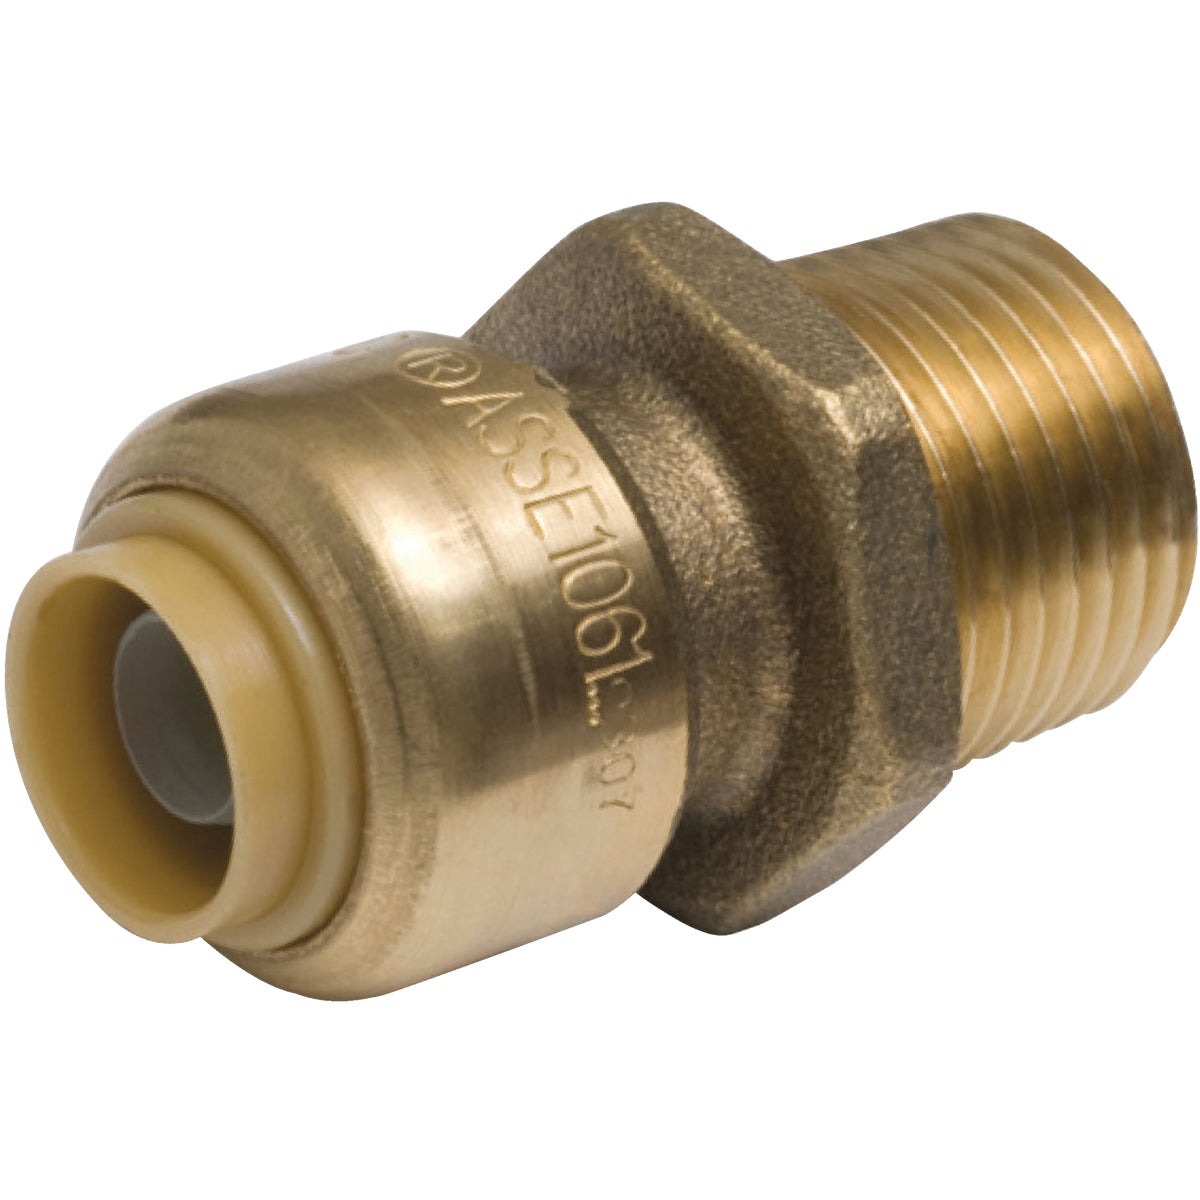 Item 467202, SharkBite Max push-to-connect fittings allow you make pipe connections with